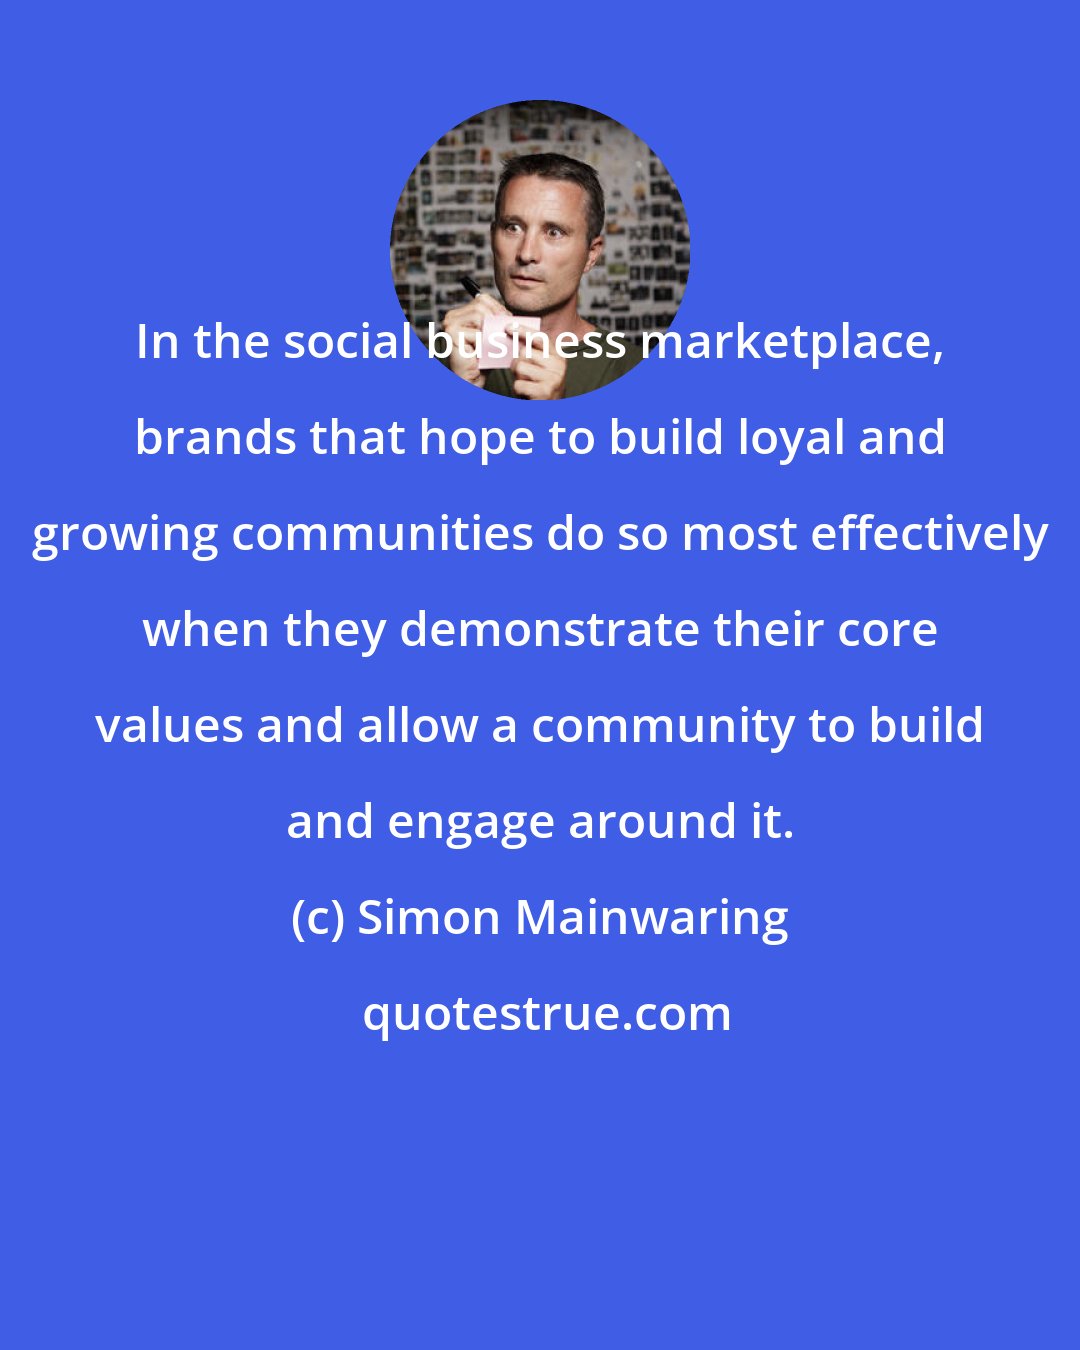 Simon Mainwaring: In the social business marketplace, brands that hope to build loyal and growing communities do so most effectively when they demonstrate their core values and allow a community to build and engage around it.